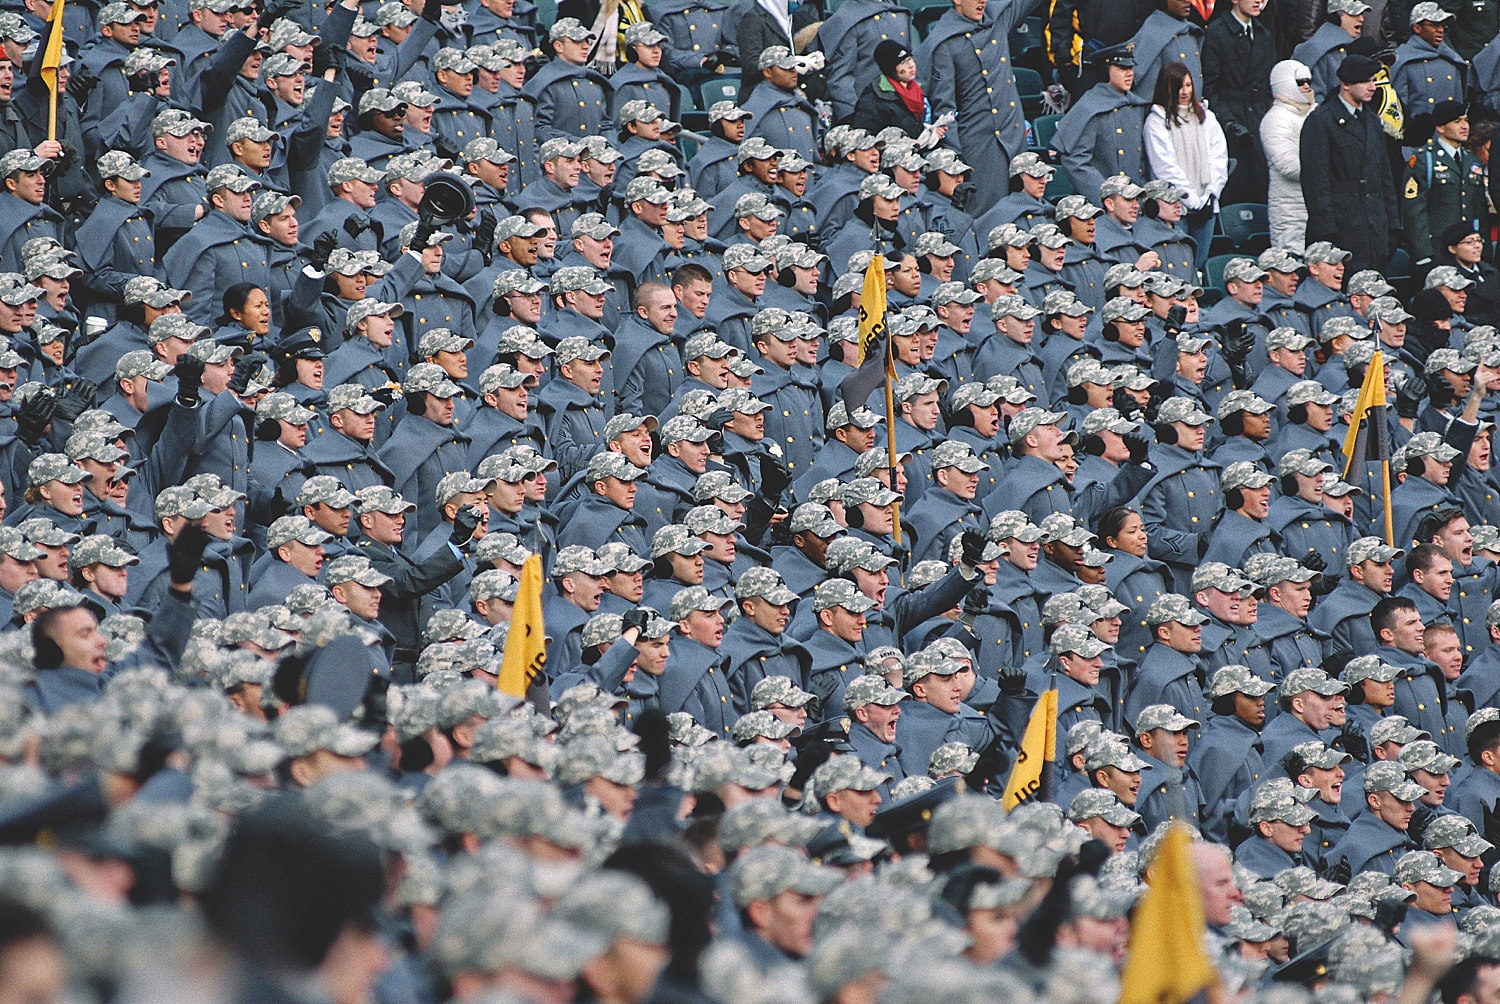 16-cadets-watching-army-navy-game.jpg